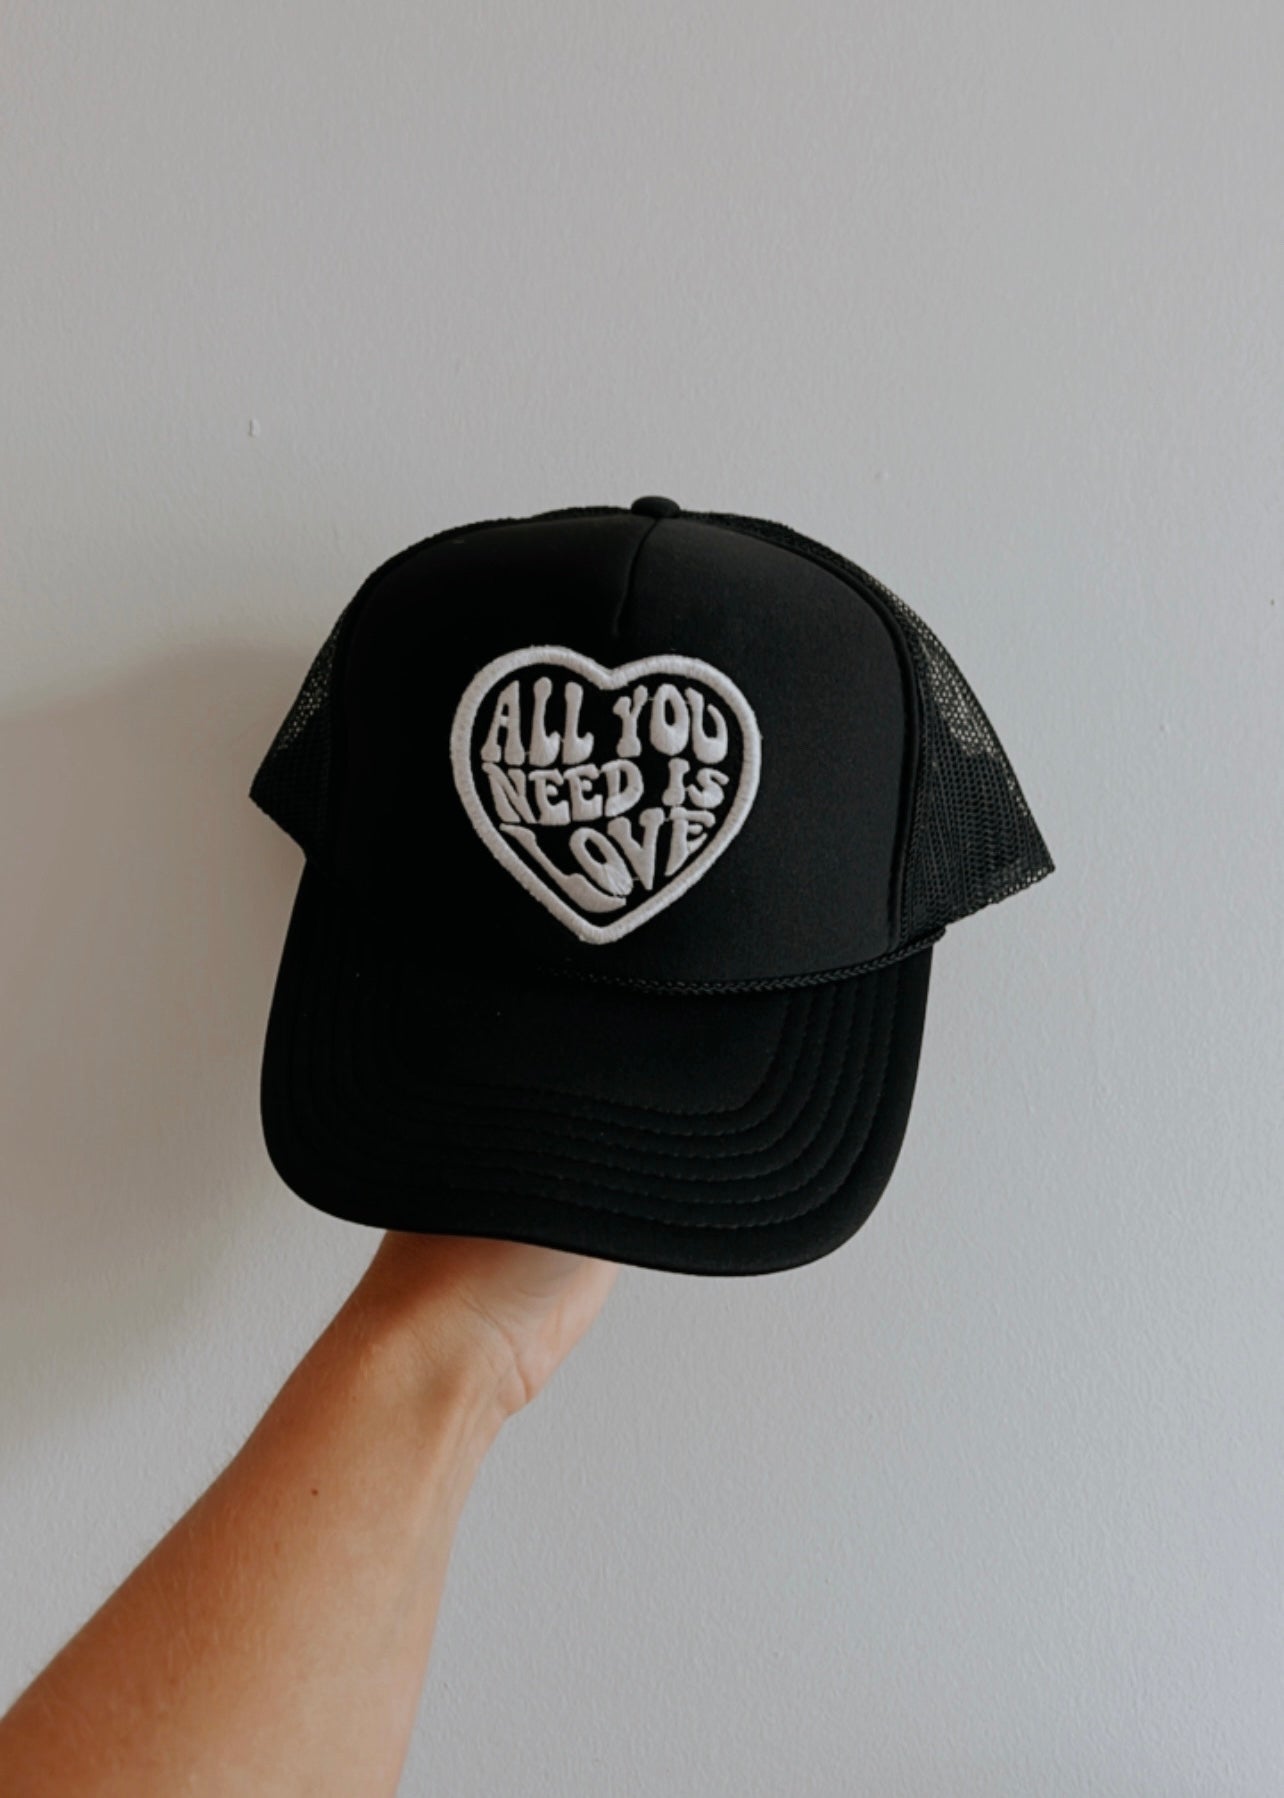 All You Need Is Love Trucker Hat Black